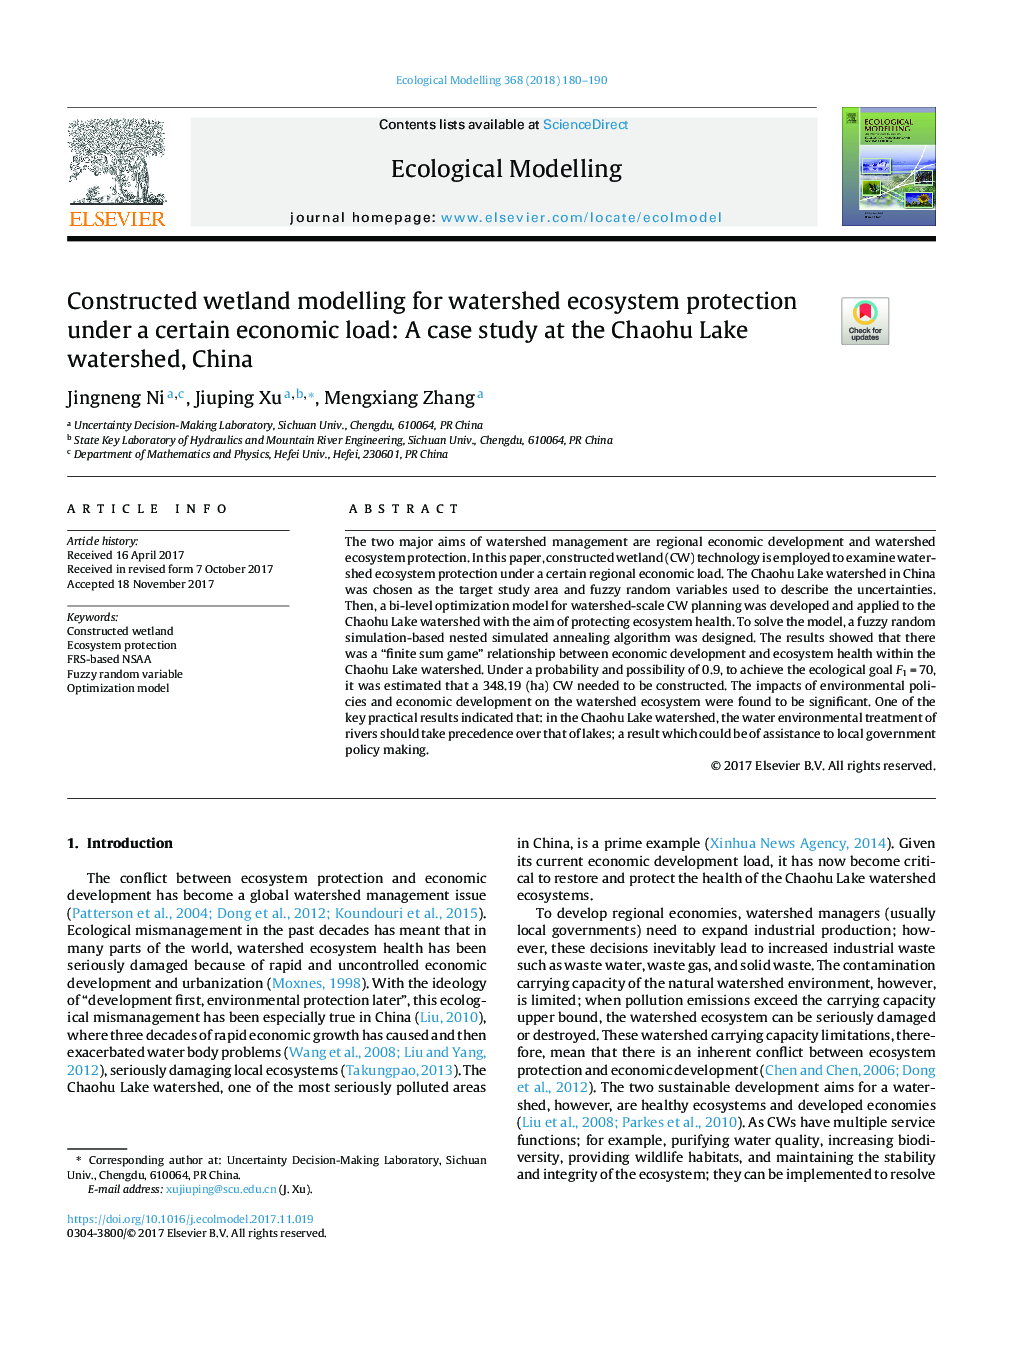 Constructed wetland modelling for watershed ecosystem protection under a certain economic load: A case study at the Chaohu Lake watershed, China